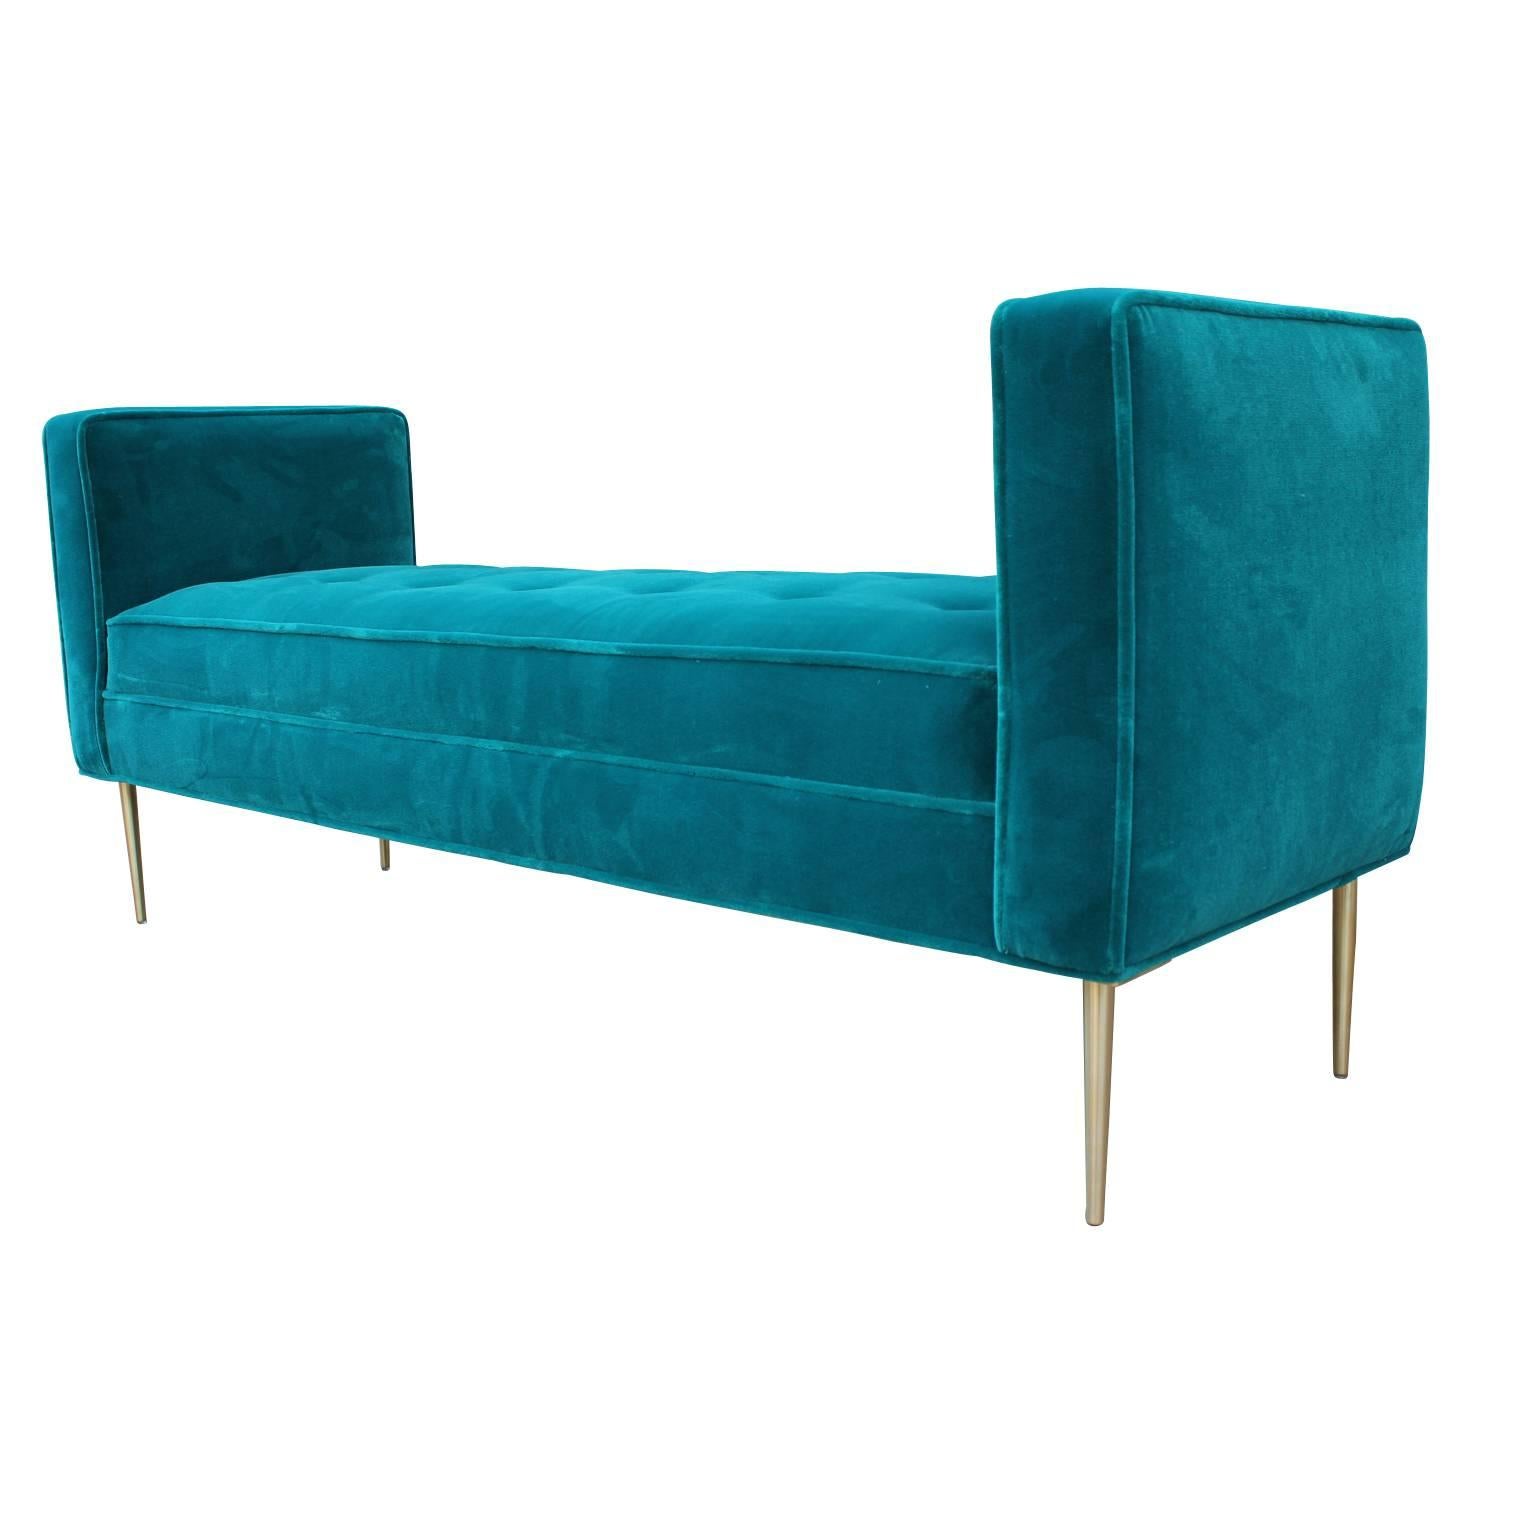 Beautiful armed bench upholstered in a luscious teal / turquoise velvet with brushed brass legs.